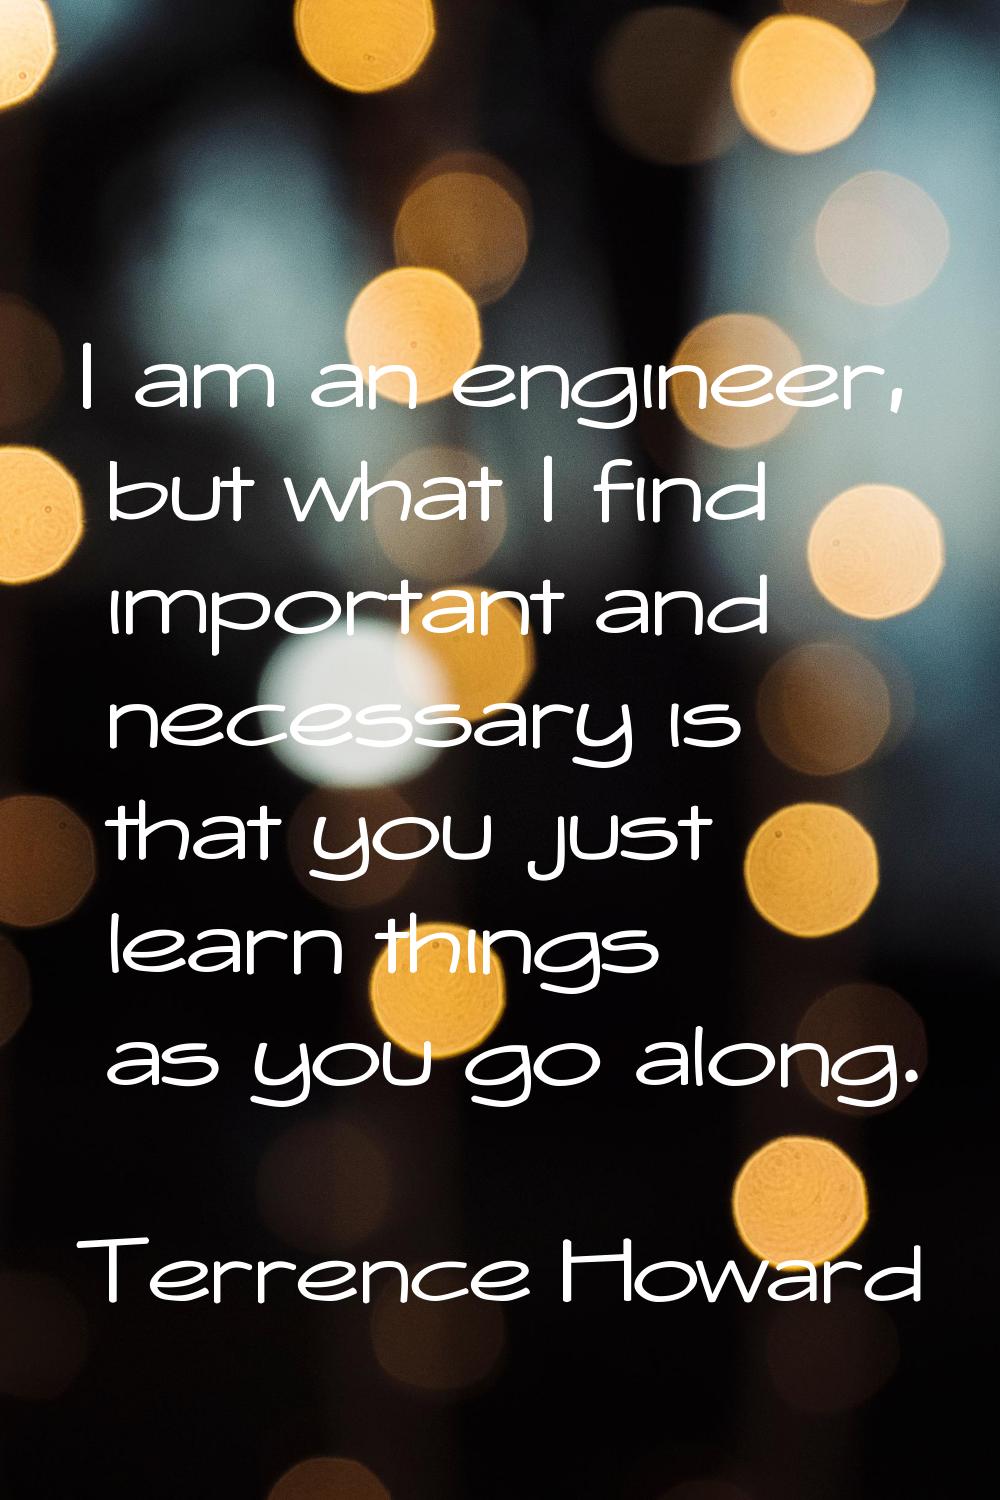 I am an engineer, but what I find important and necessary is that you just learn things as you go a